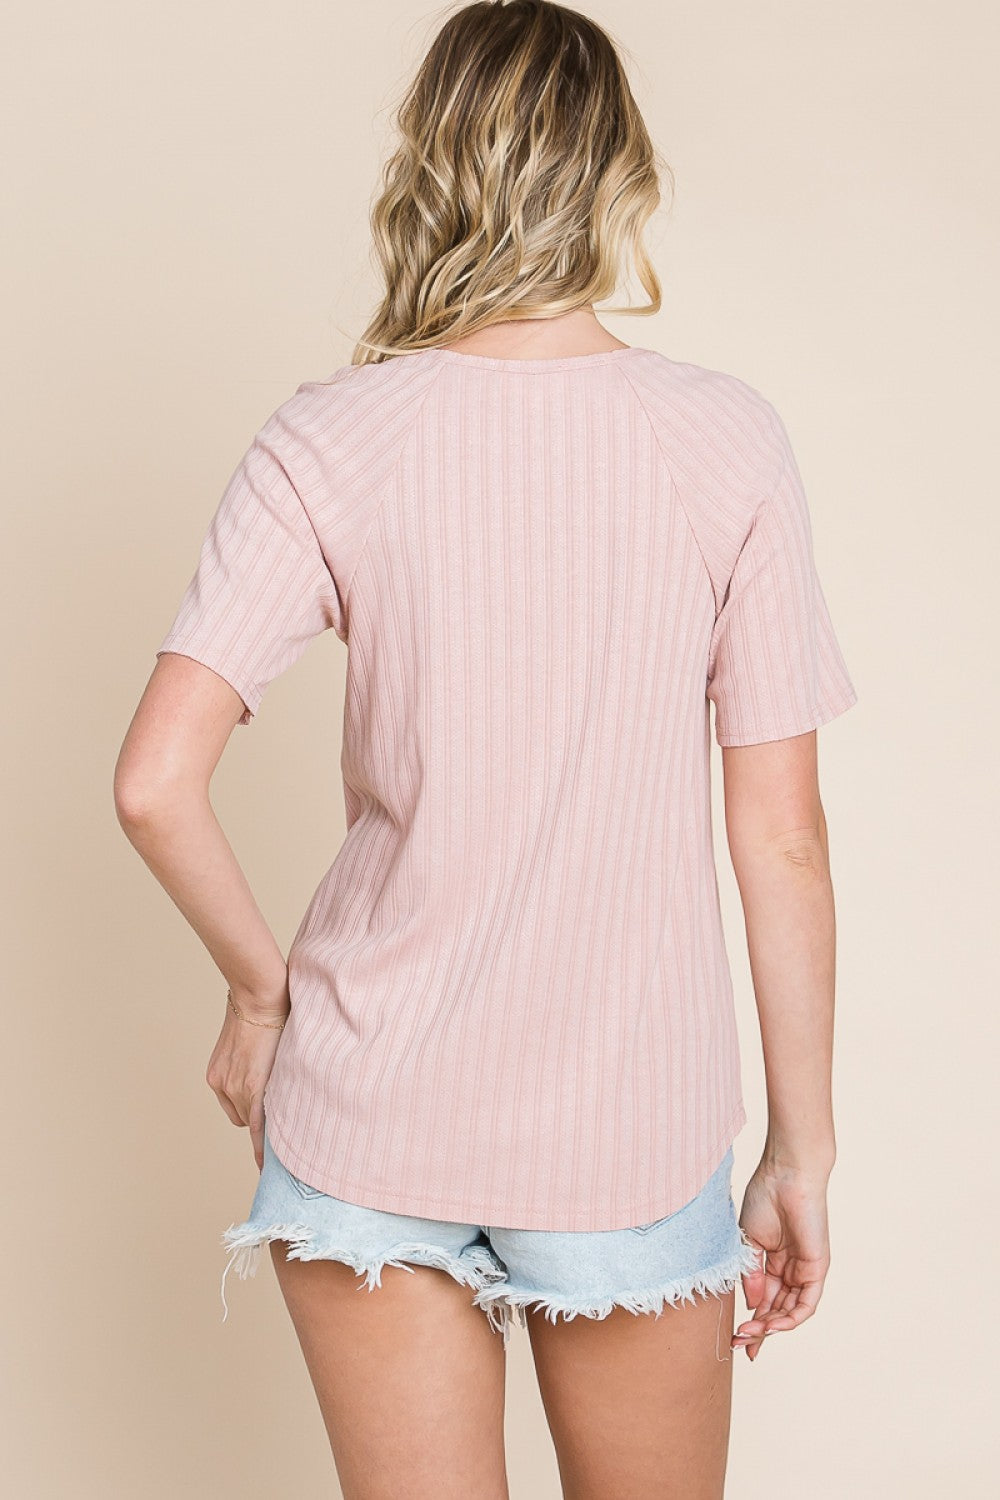 Hey Lady Textured Rib Top in Pink